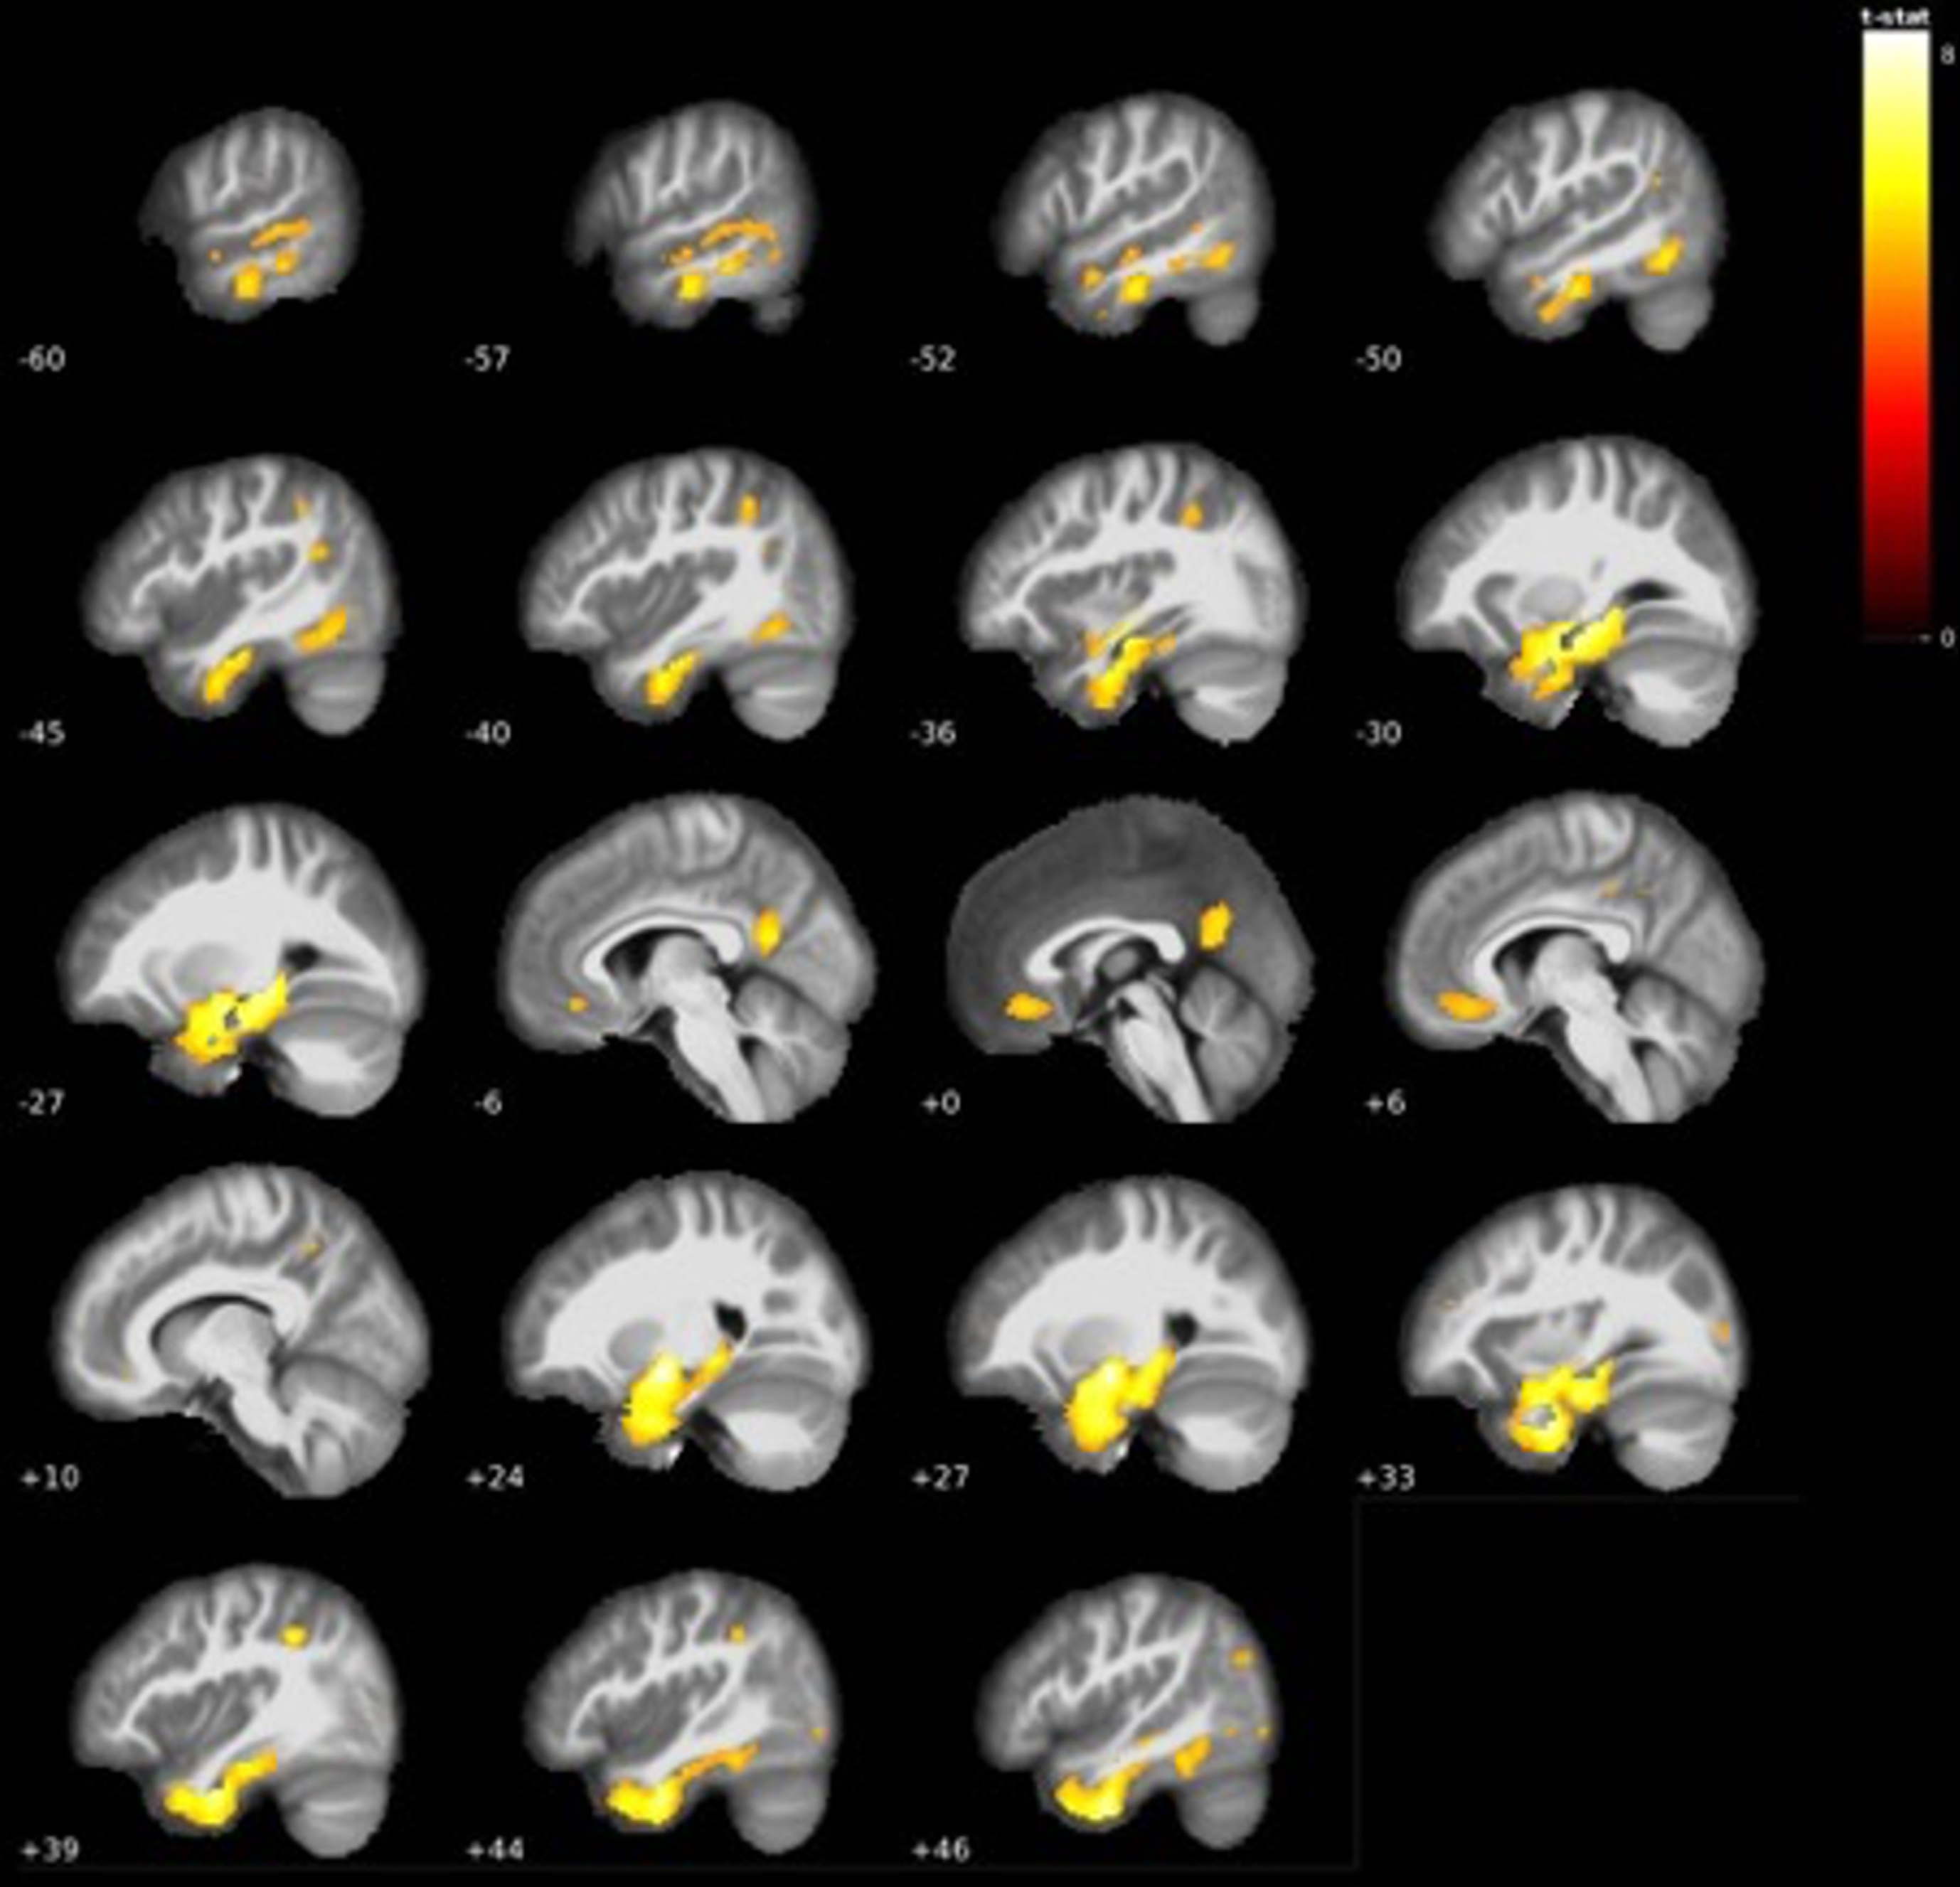 Additional grey matter volume reductions centered mostly around temporal areas in AD dementia < LMCI (see Table 4).